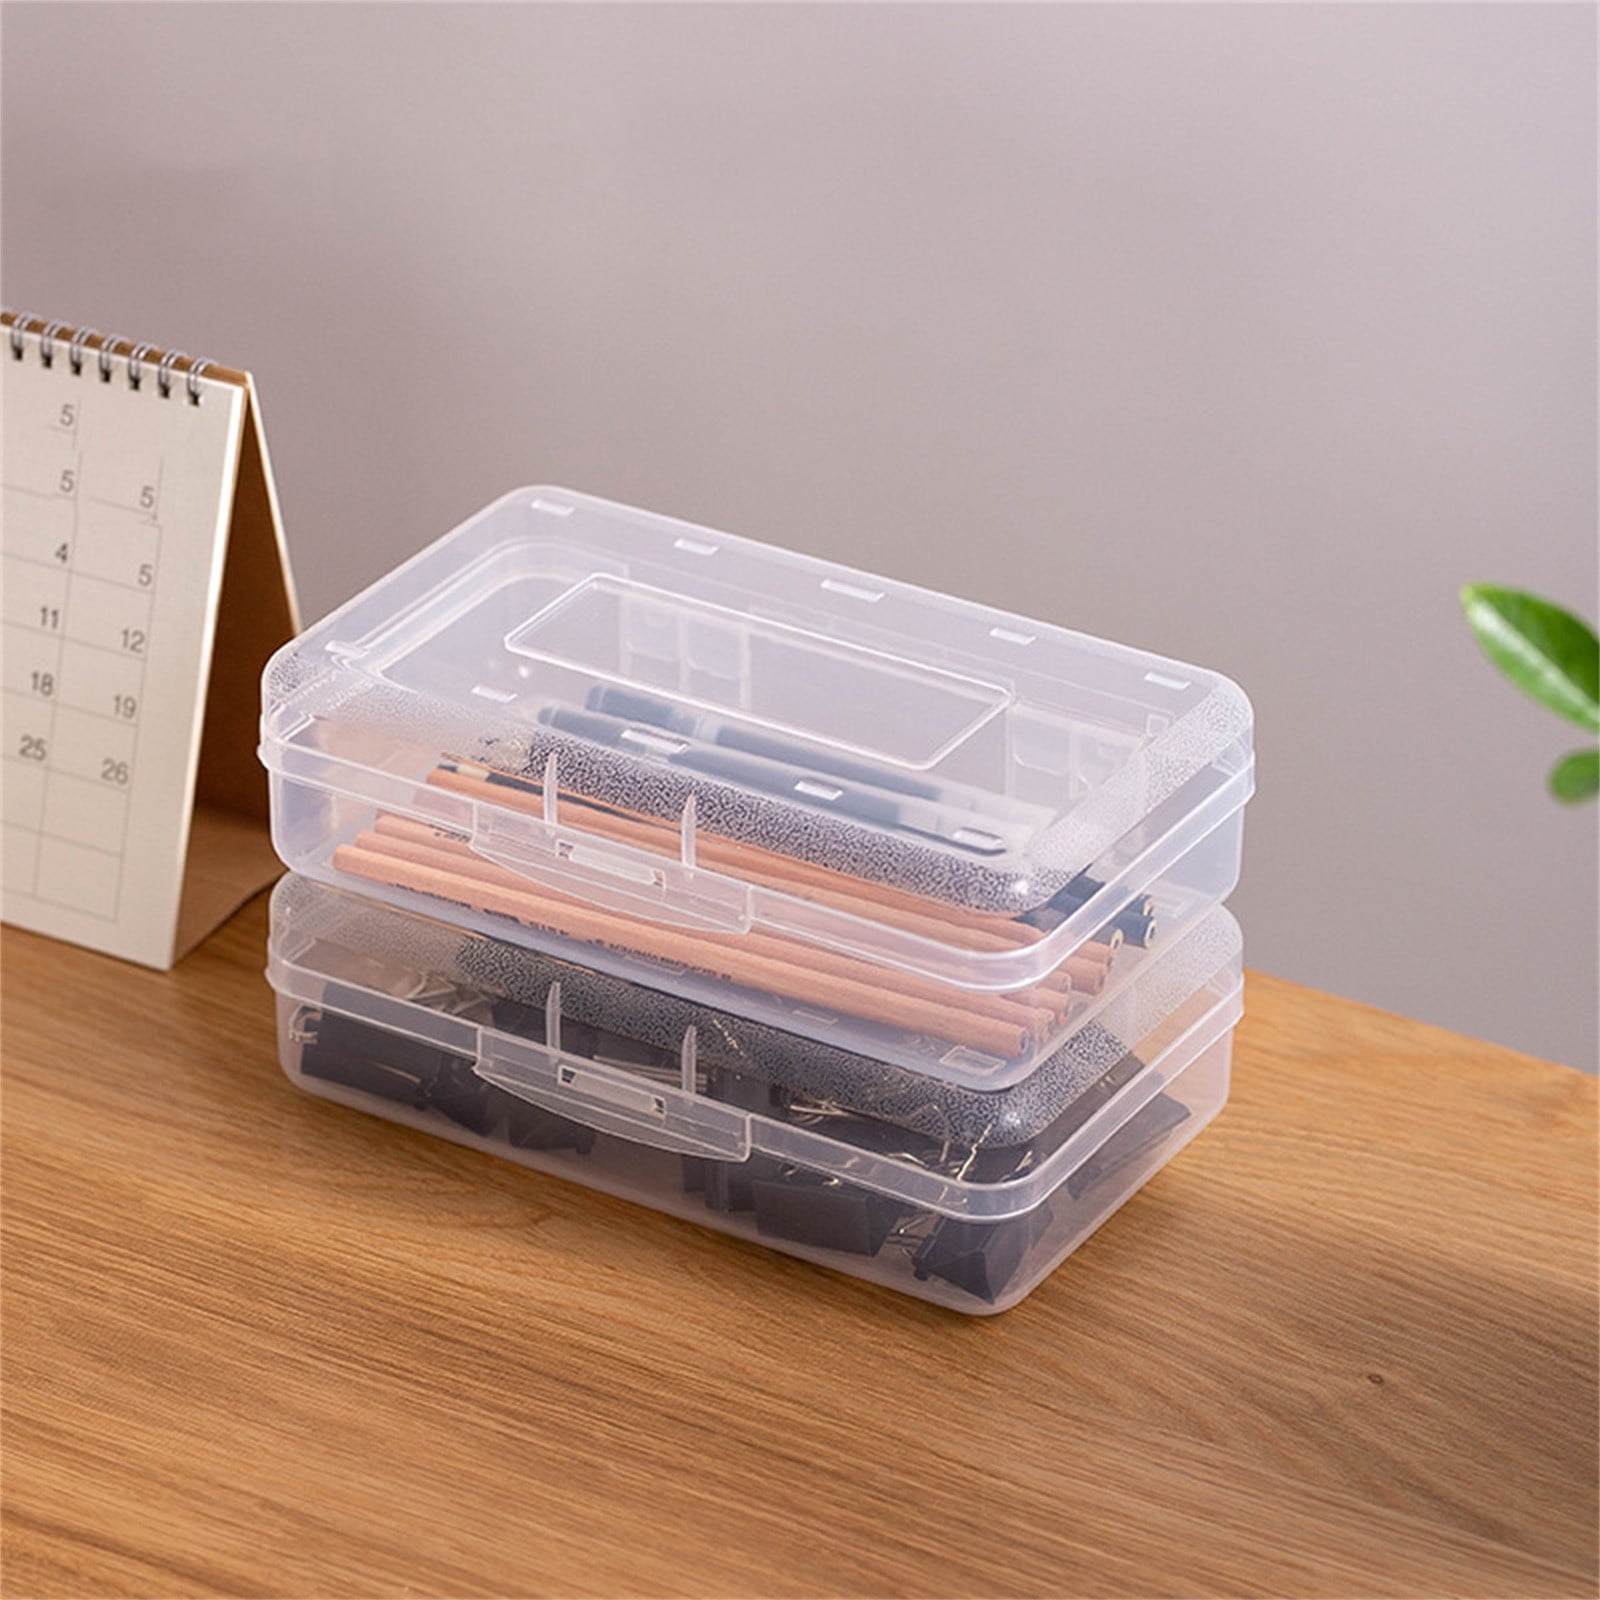 1 pack plastic pencil box large capacity pencil boxes clear boxes with  snap-tight lid stackable desi